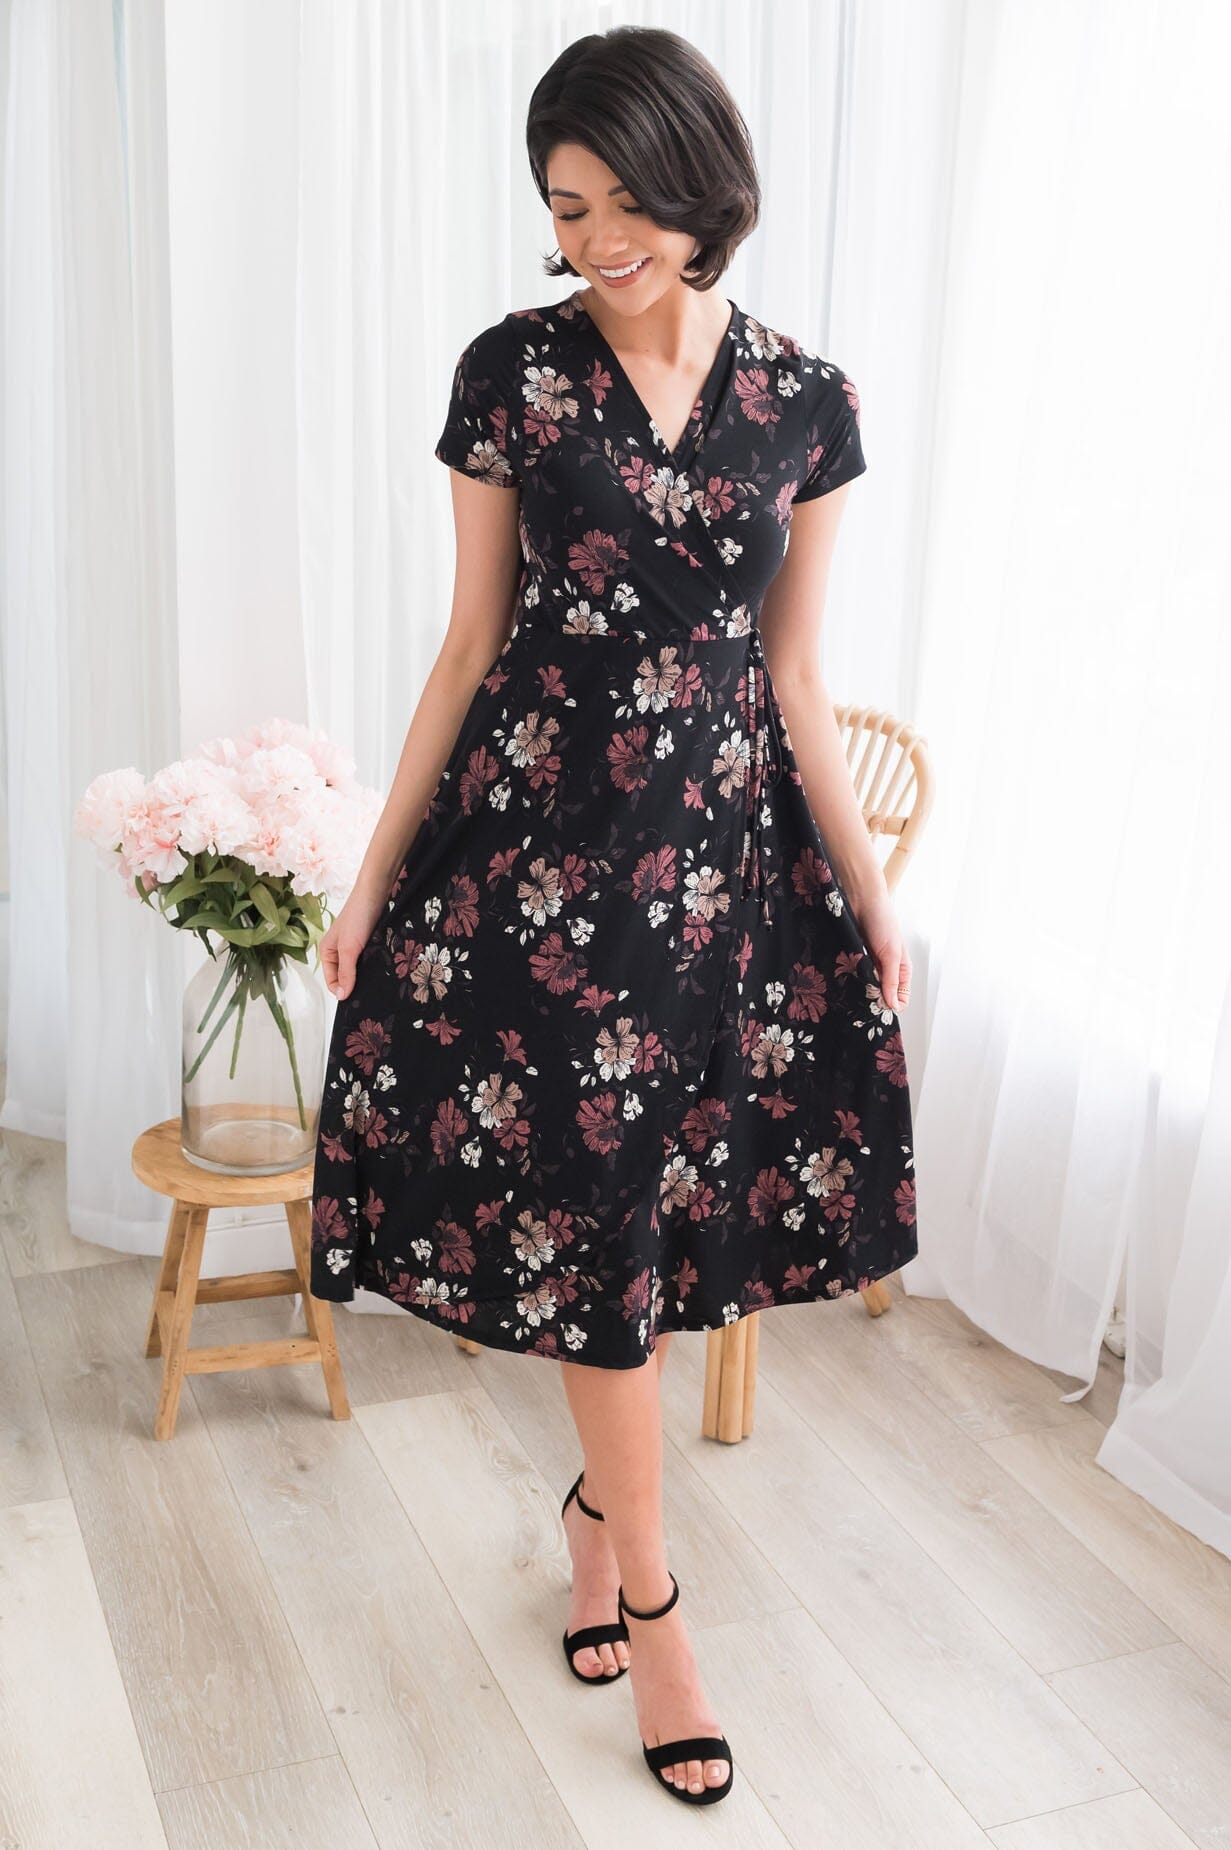 How to Wear Midi Dresses if You Are Petite: 14 Hacks You Must Learn -  Petite Dressing